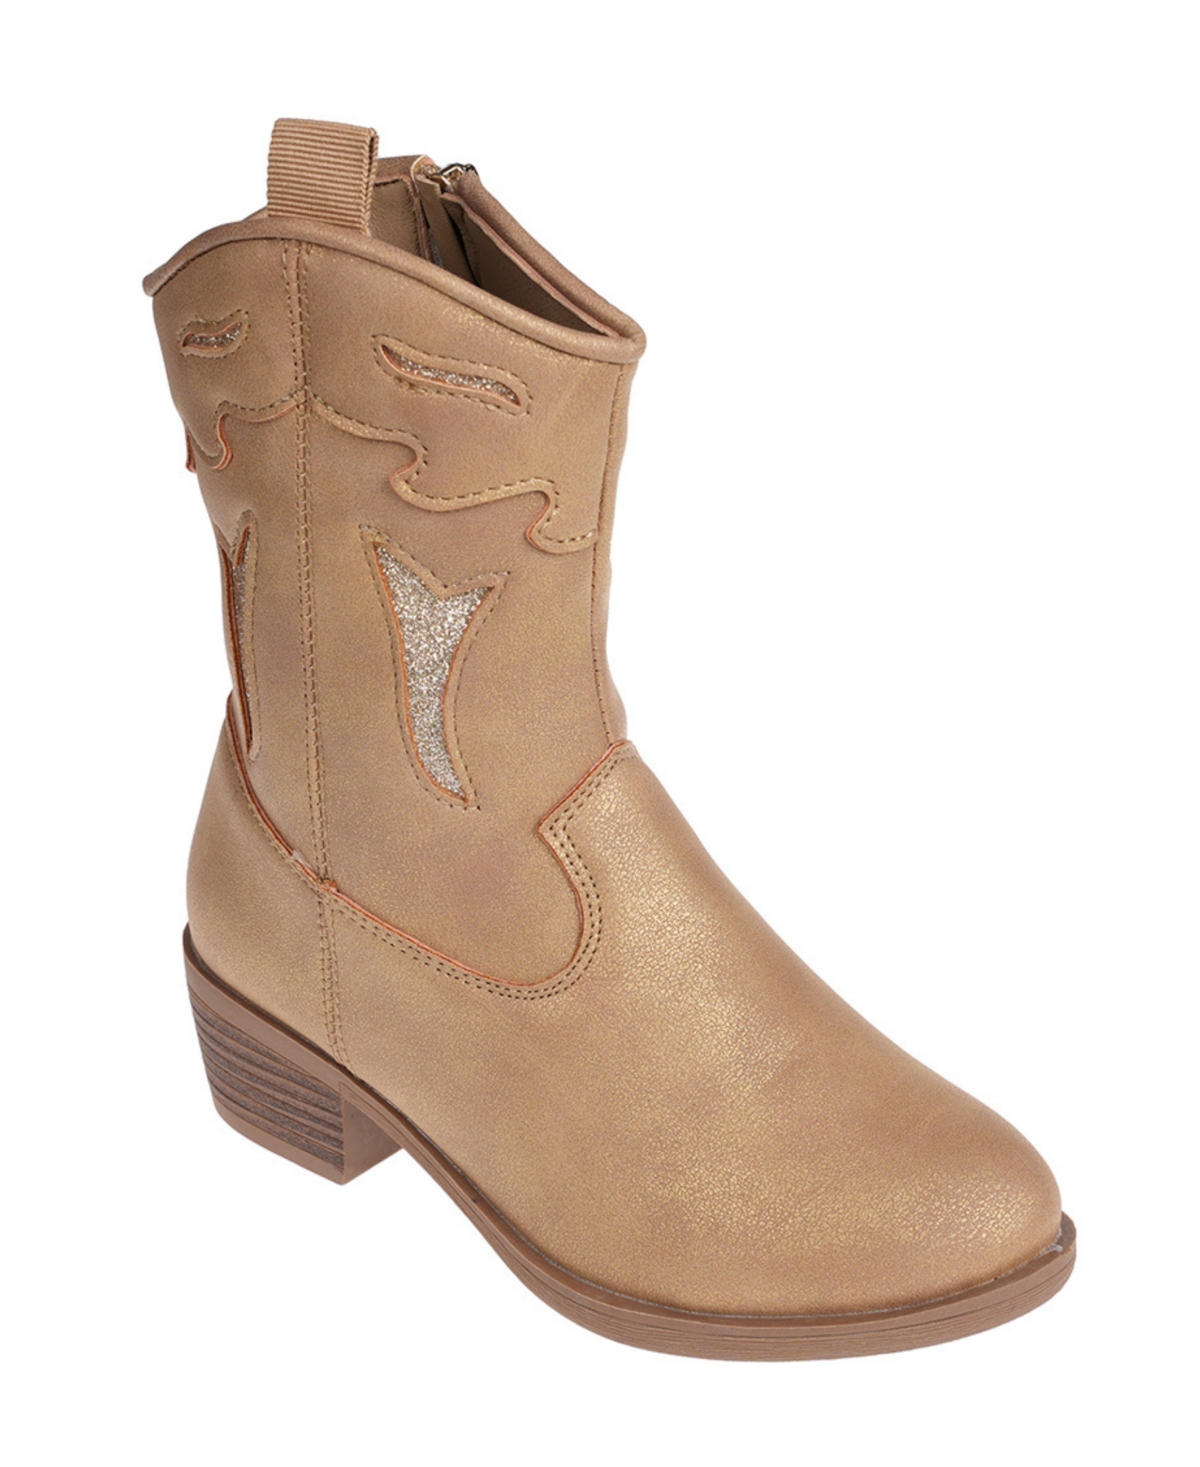 VINCE CAMUTO LITTLE GIRLS MID CALF GLITTER CLASSIC WESTERN COWGIRL BOOTS